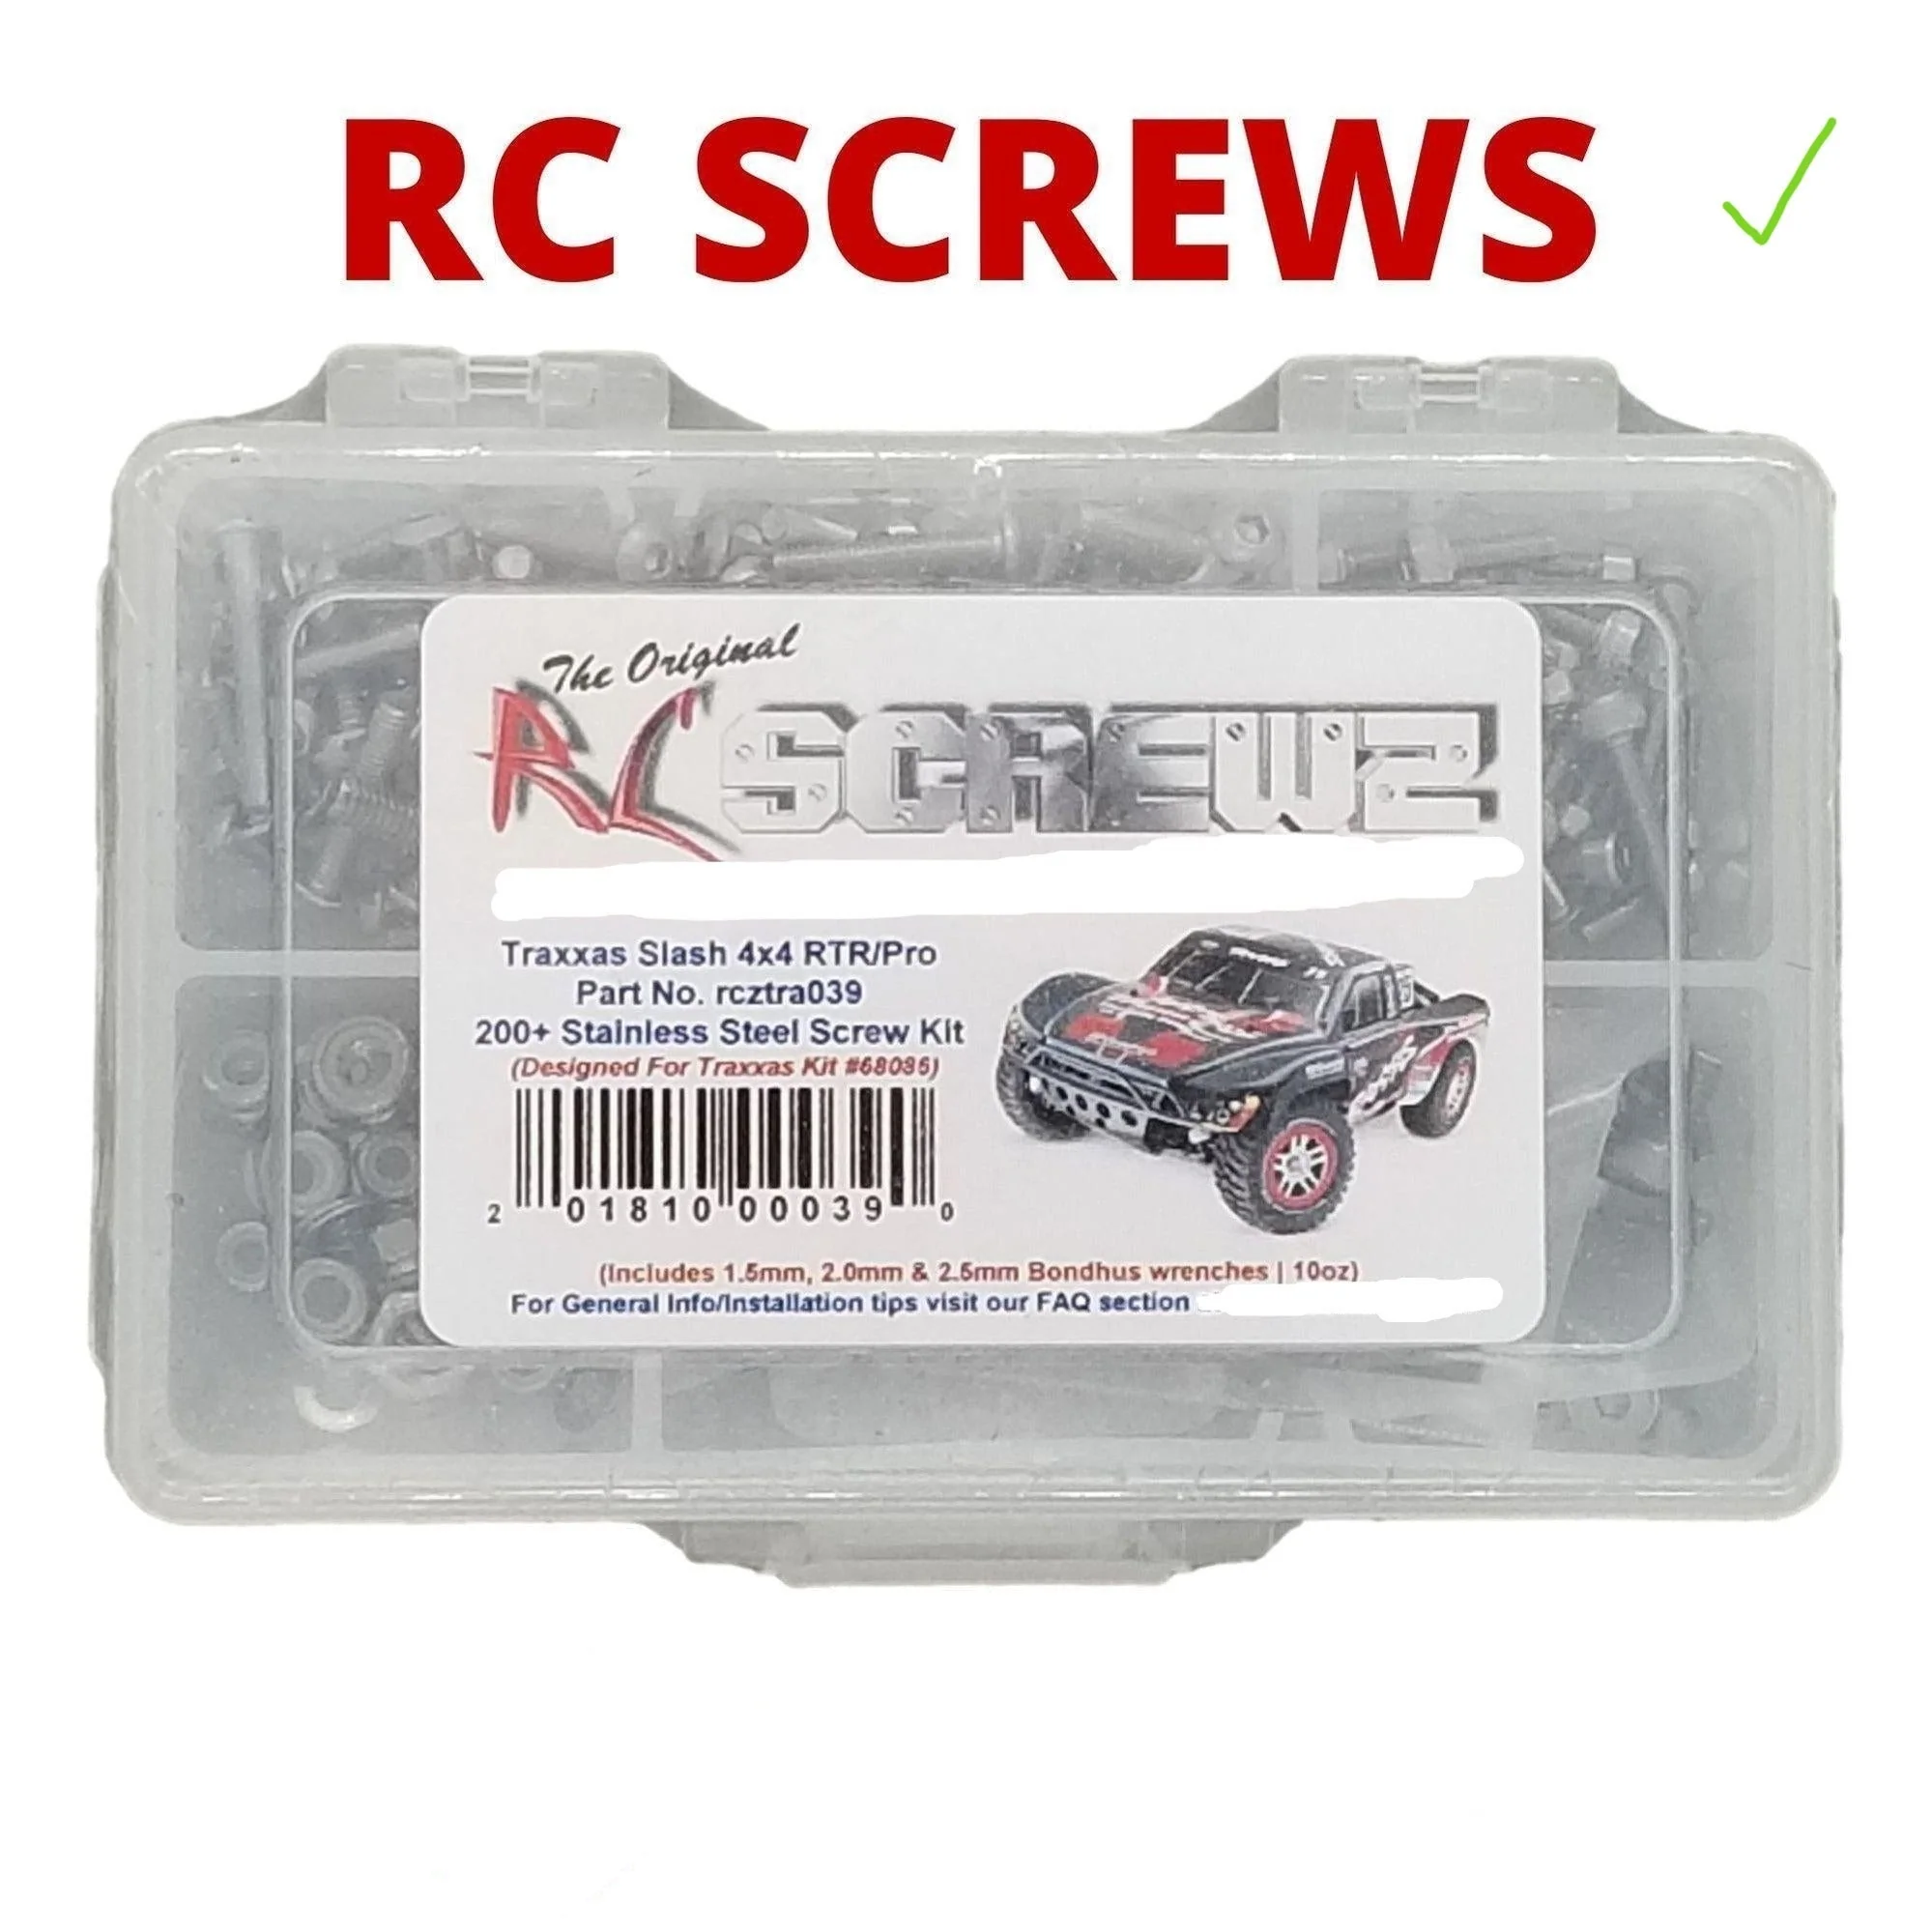 RCScrewZ Stainless Screw Kit tra039 for Traxxas Slash 4x4 1/10 (#68086) SC Truck - Picture 11 of 12